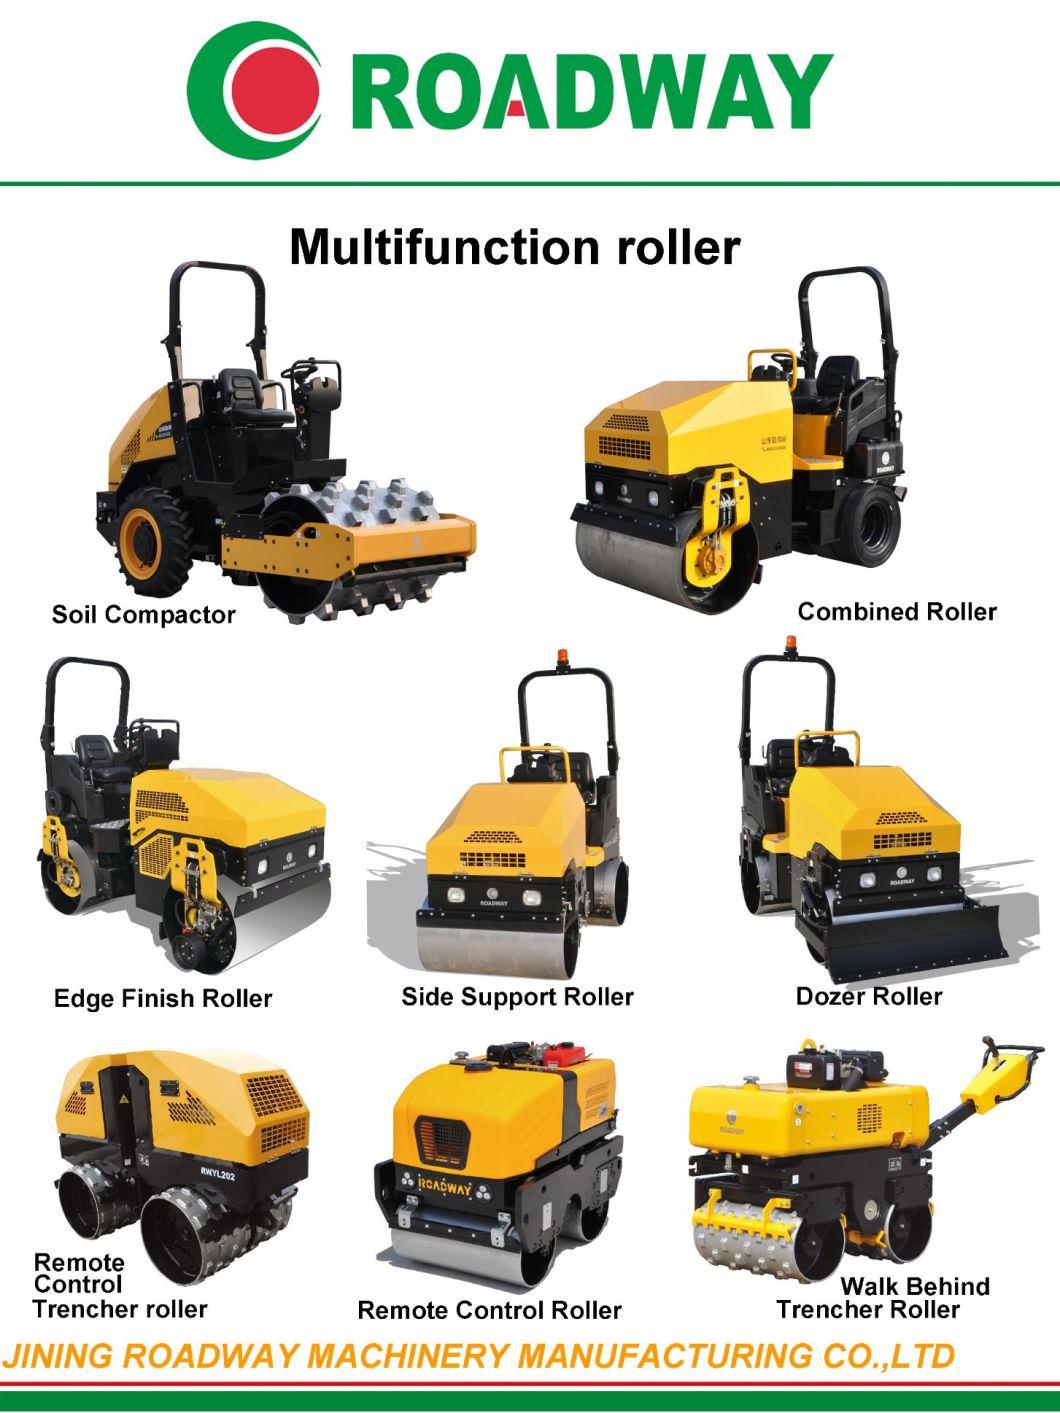 Hydraulic Driving Vibratory Road Roller